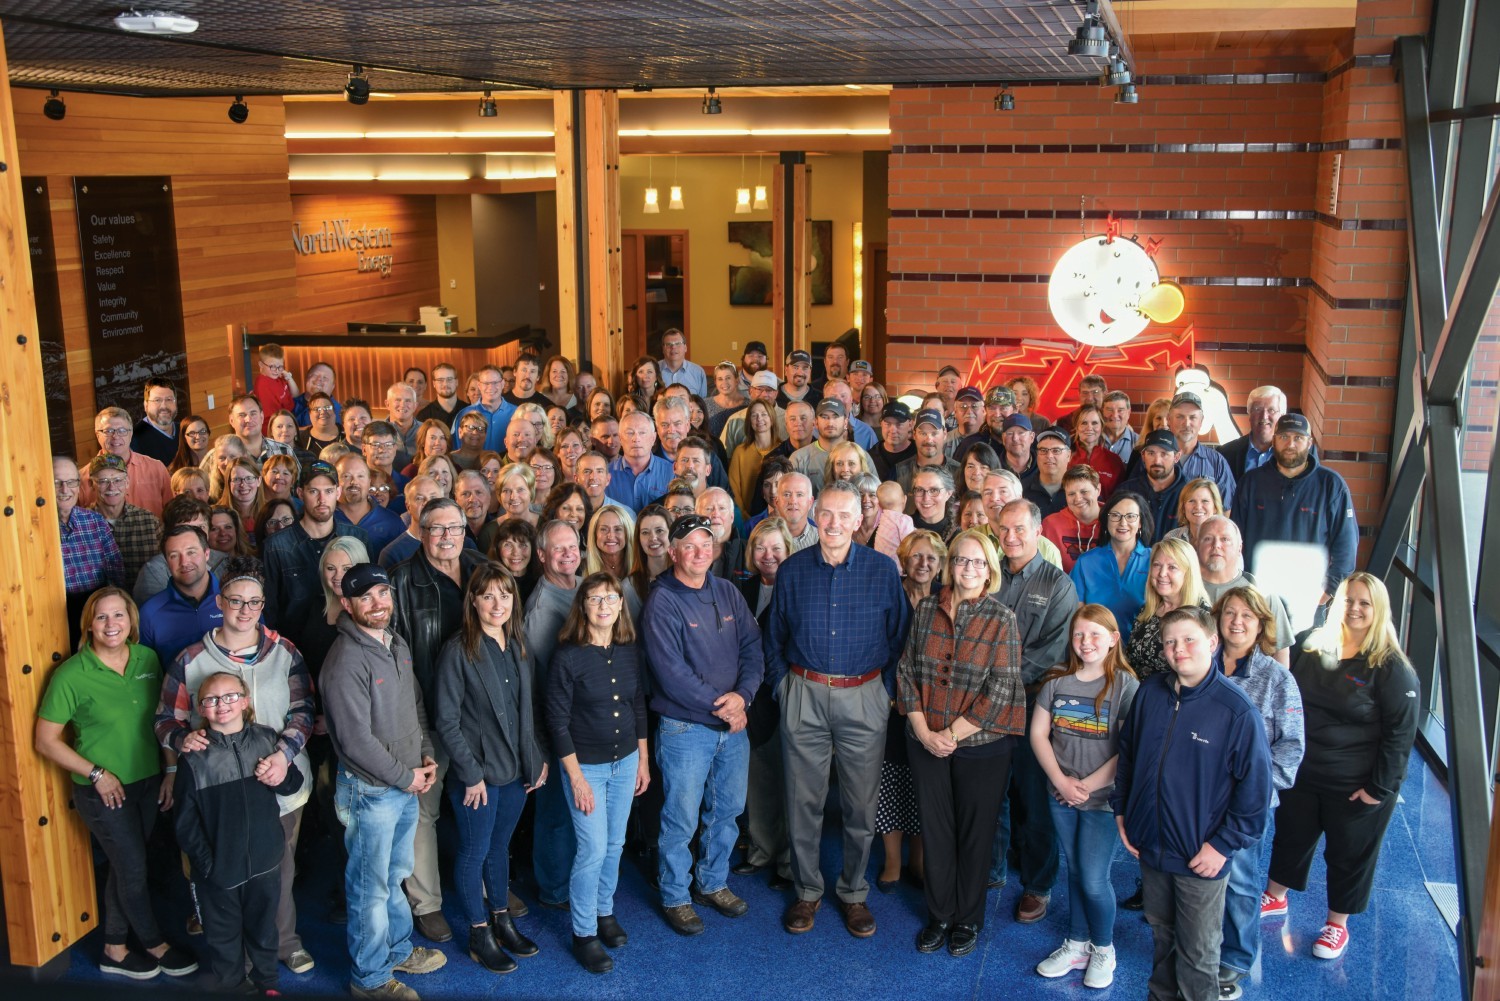 NorthWestern Energy employs nearly 1500 people, and we understand that our employees are our most valuable asset. 